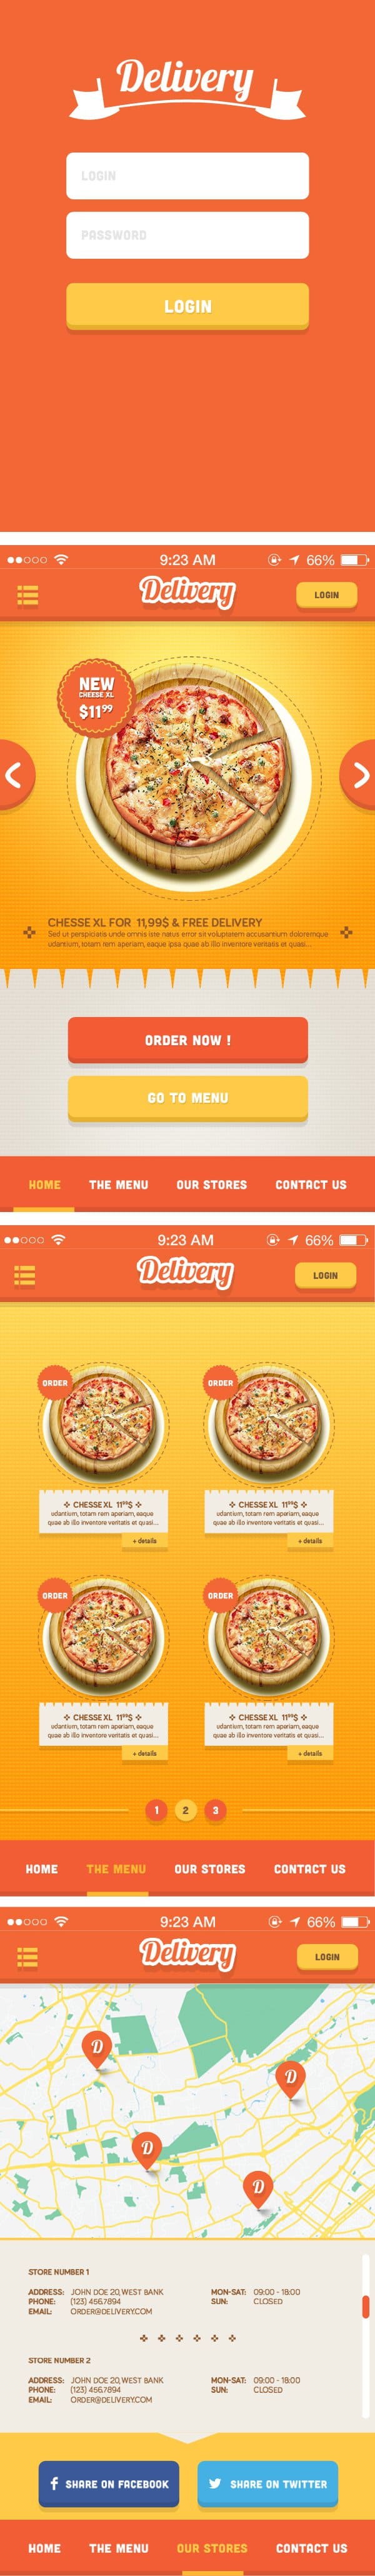 Delivery iPhone App UI Kit PSD